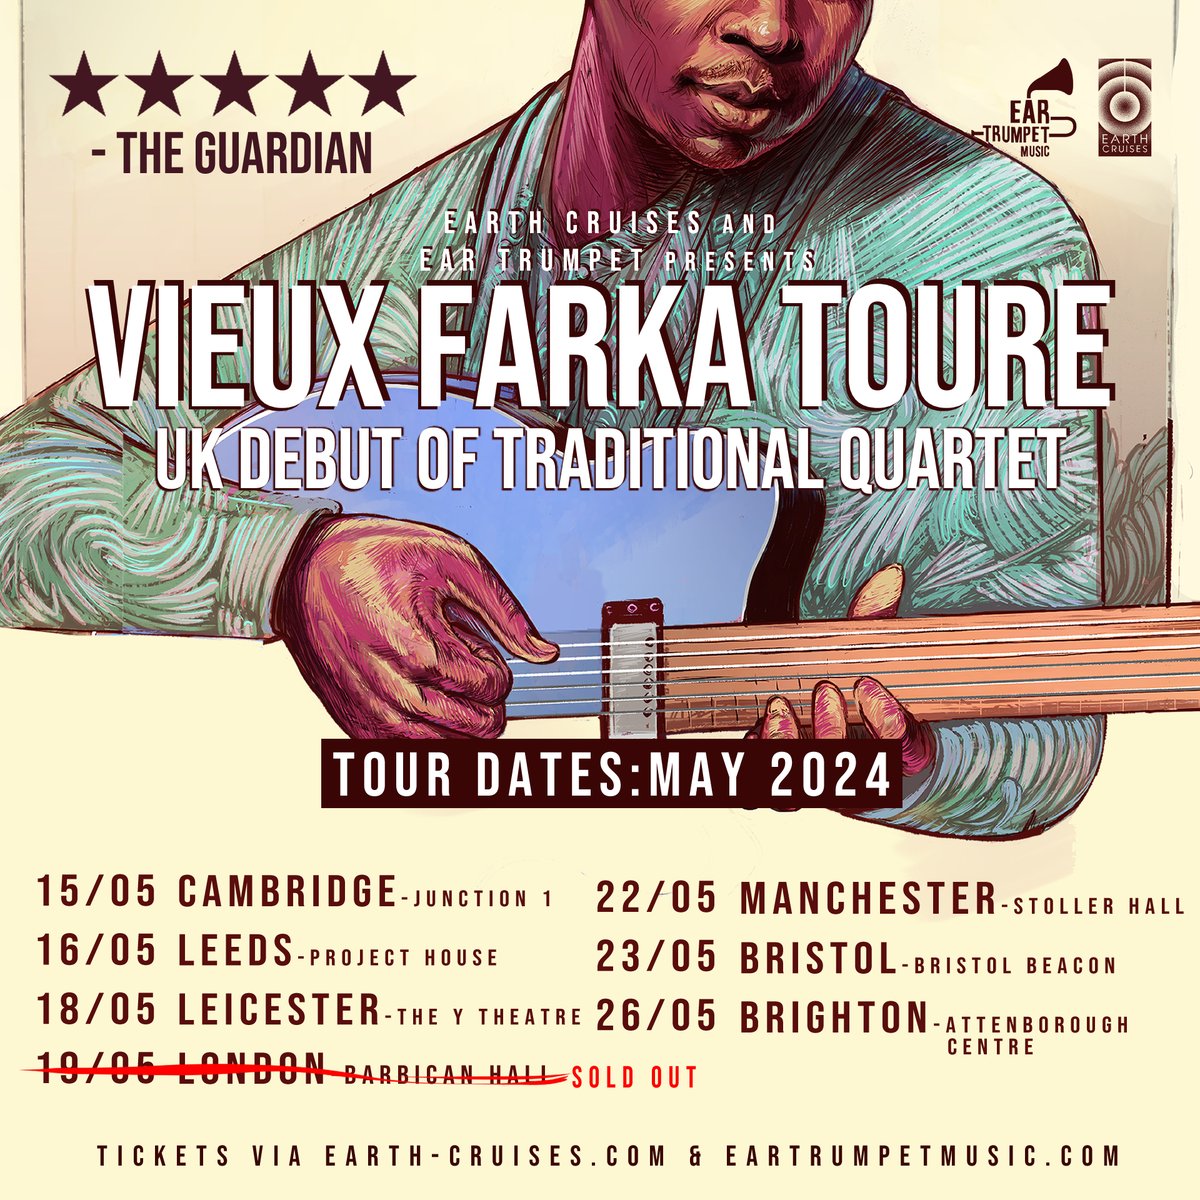 Very excited to announce I'll be back in the UK this May and I'm looking forward to bringing my traditional acoustic quartet on stage for the first time! See you there. Tickets: bit.ly/4bRl8S